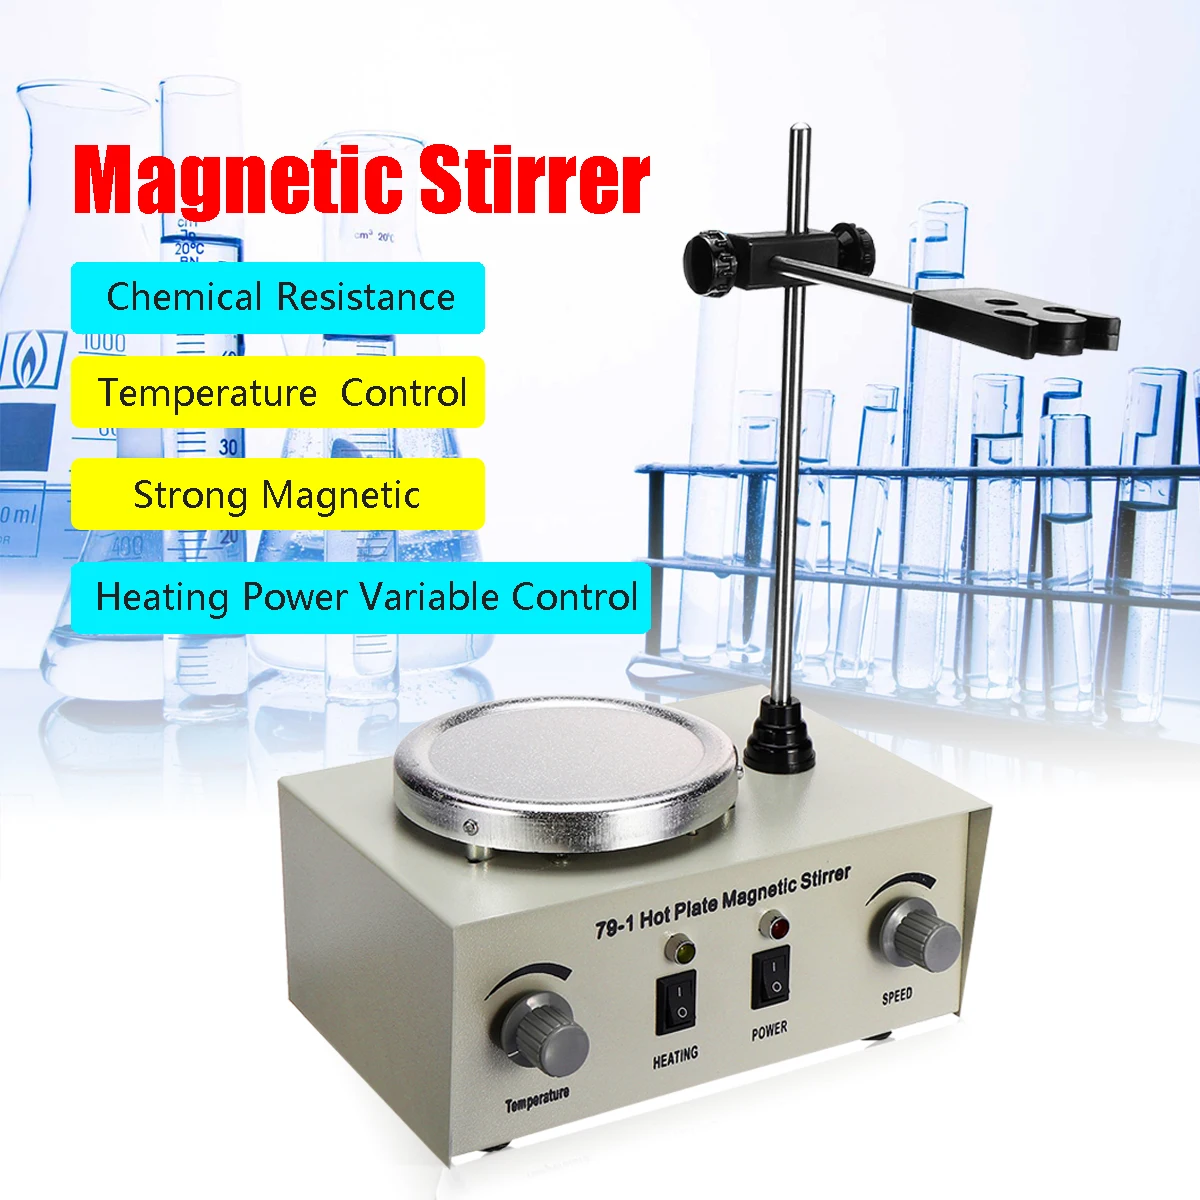 AnEssOil Magnetic Stirrer Mixer Lab Mixer Magnetic Spinner Hotplate with Heating Plate Digital Magnetic Mixer110V/220V Without Beaker 79-1NO 